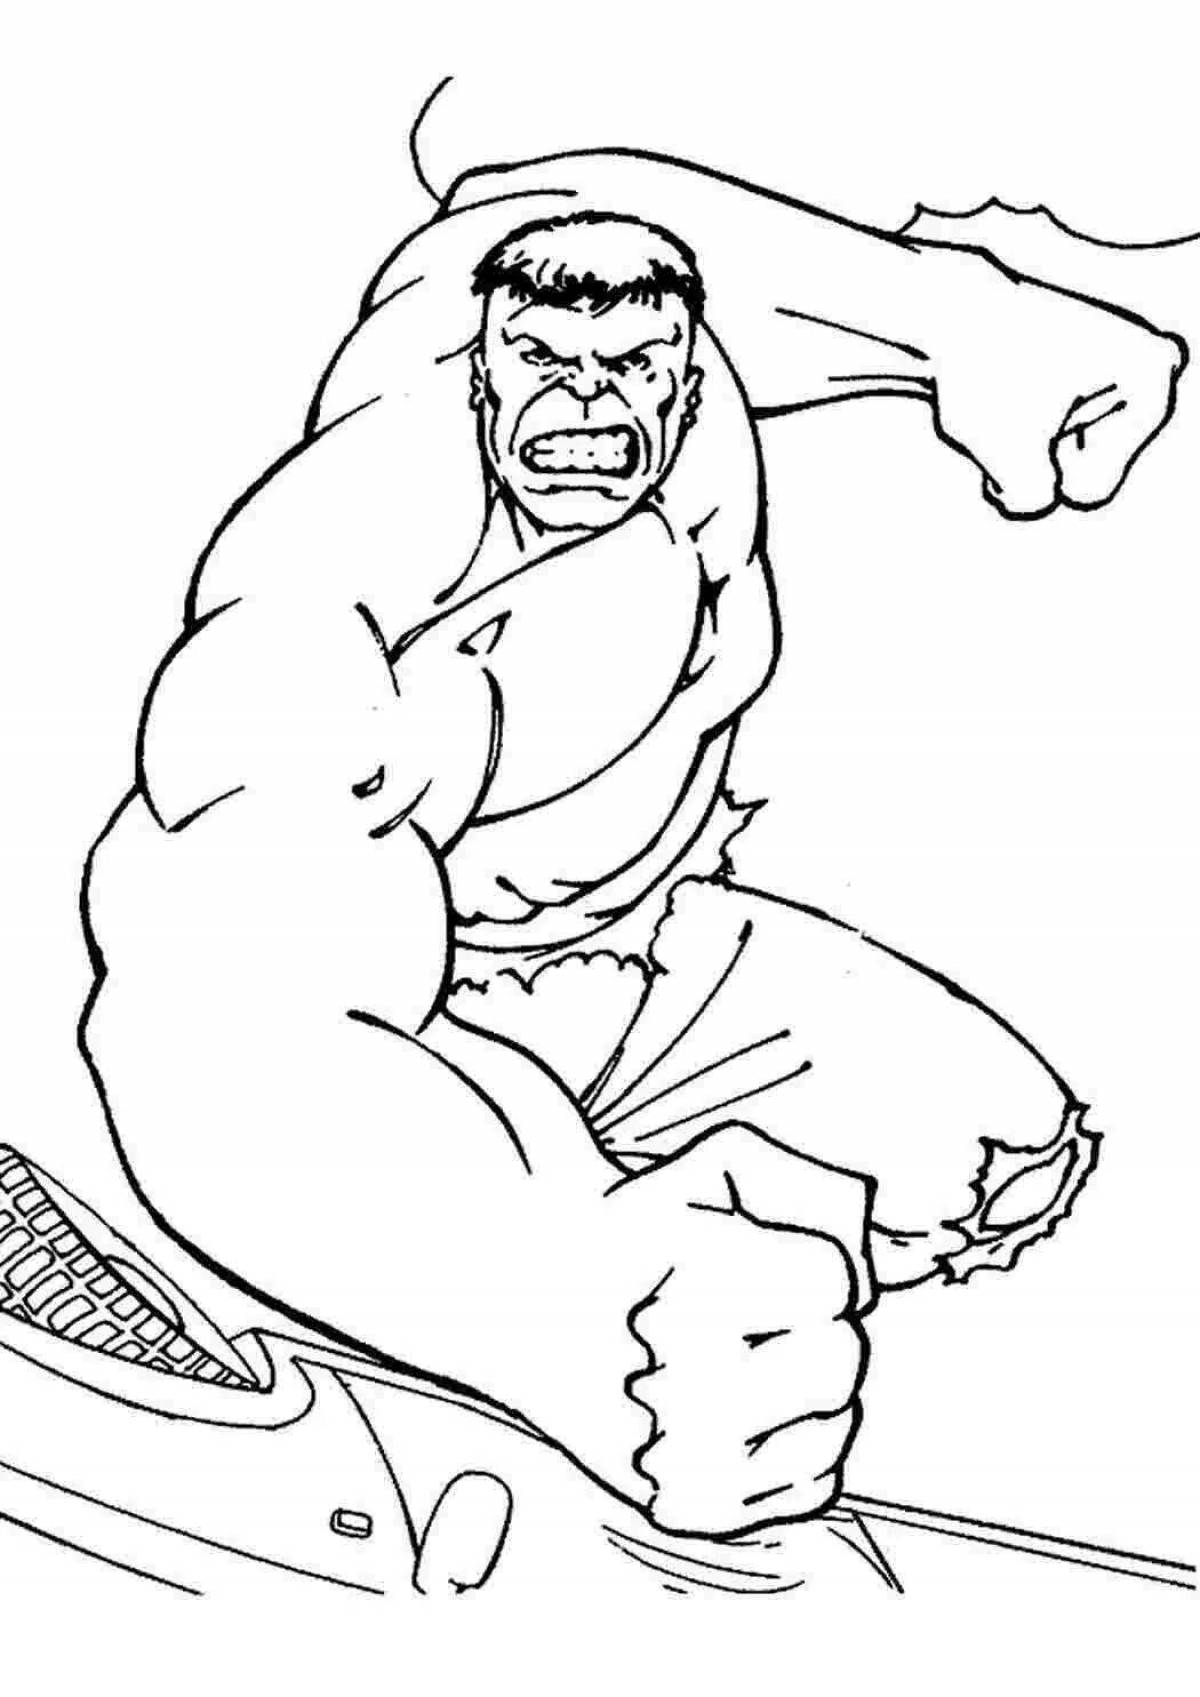 Coloring page dazzling hulk for boys